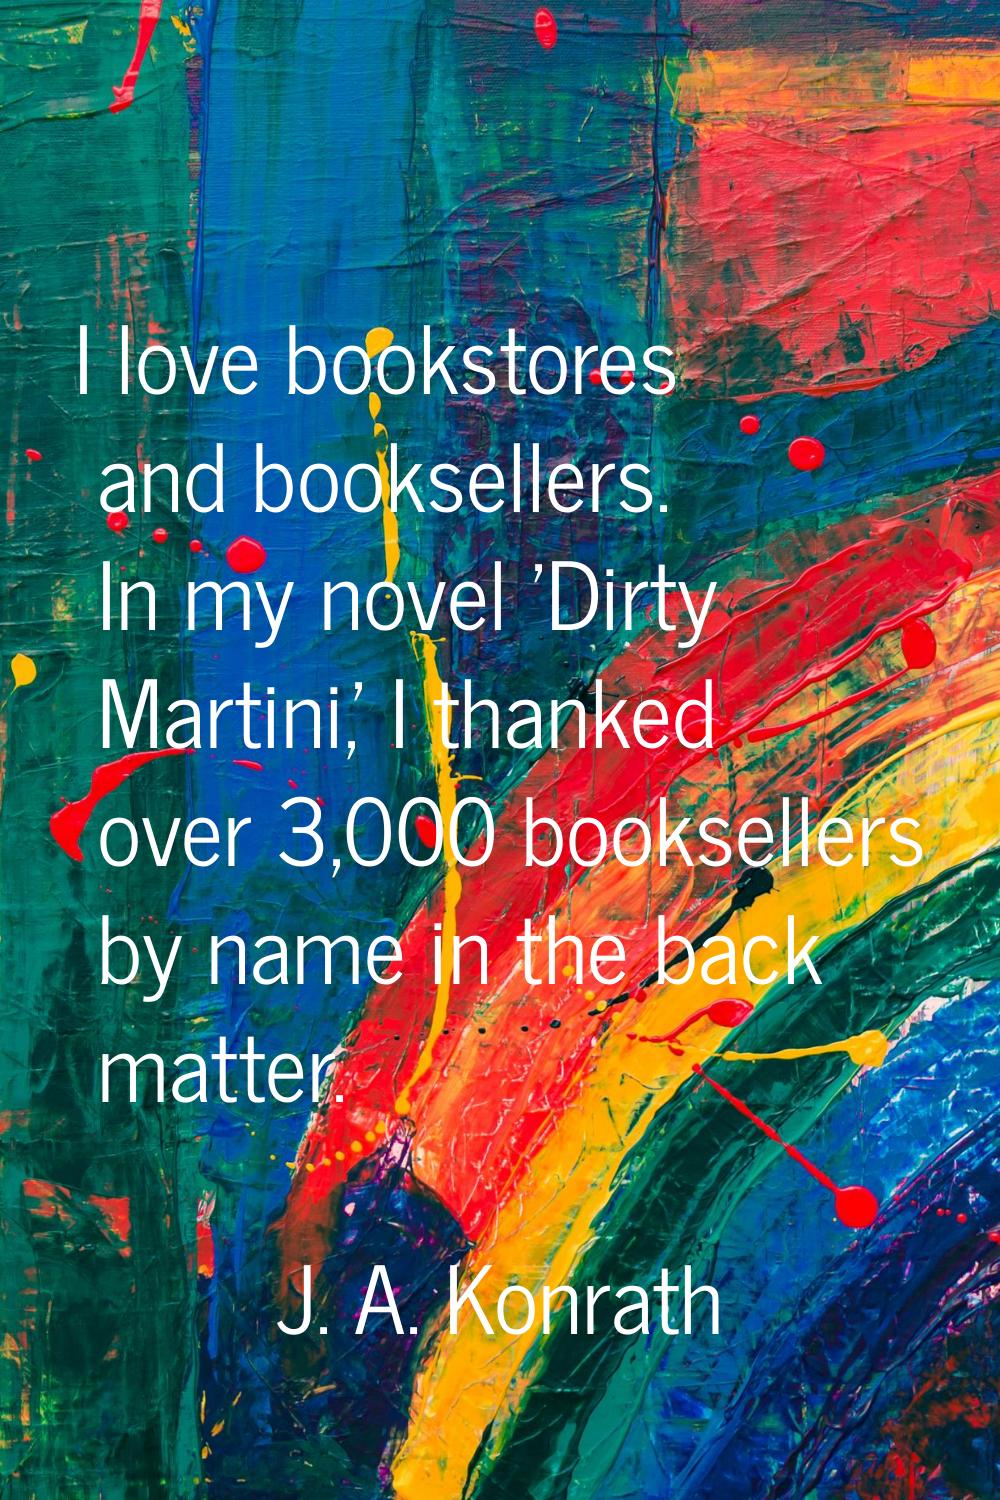 I love bookstores and booksellers. In my novel 'Dirty Martini,' I thanked over 3,000 booksellers by